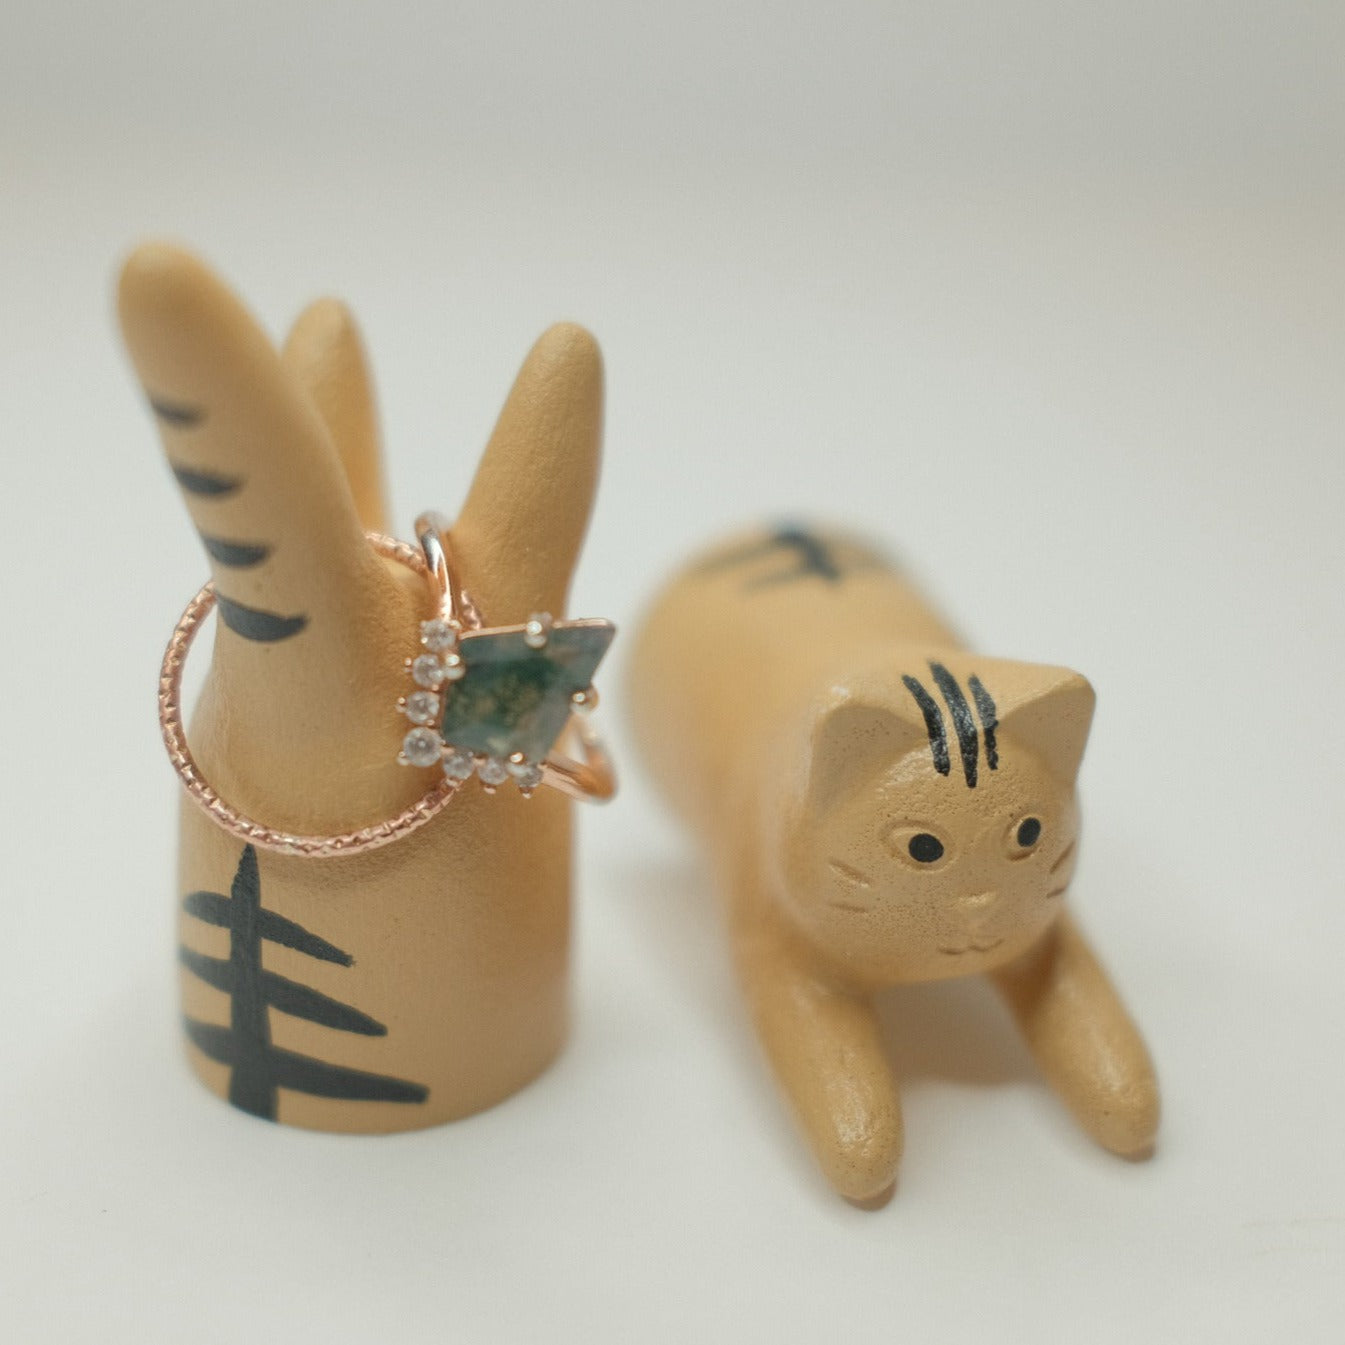 Jumping Cat Ring Stand